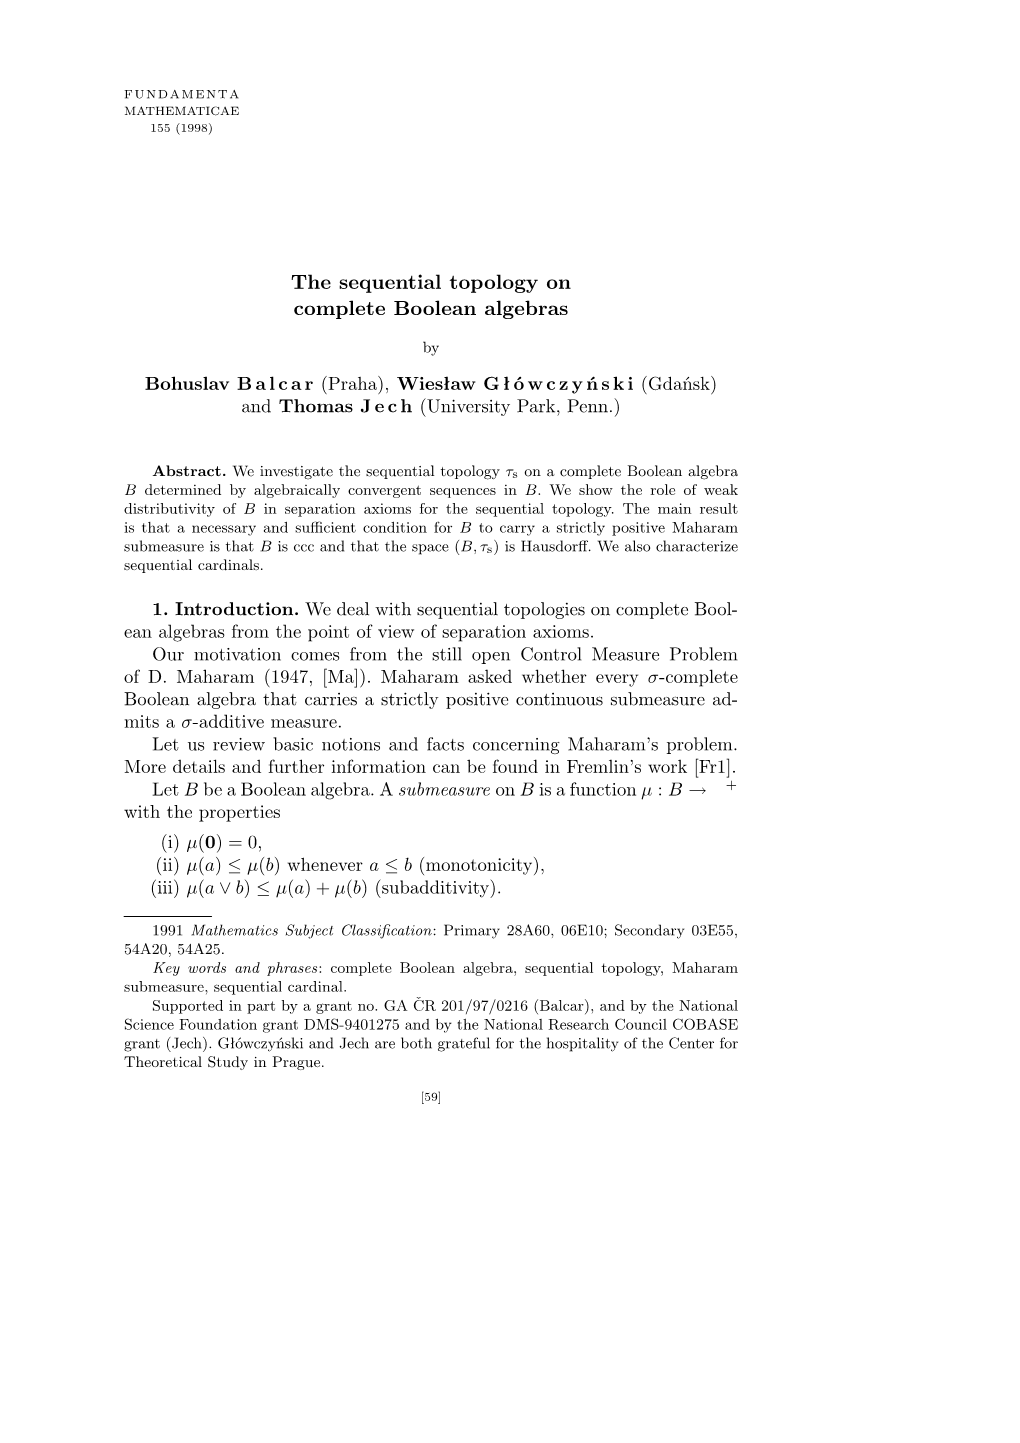 The Sequential Topology on Complete Boolean Algebras